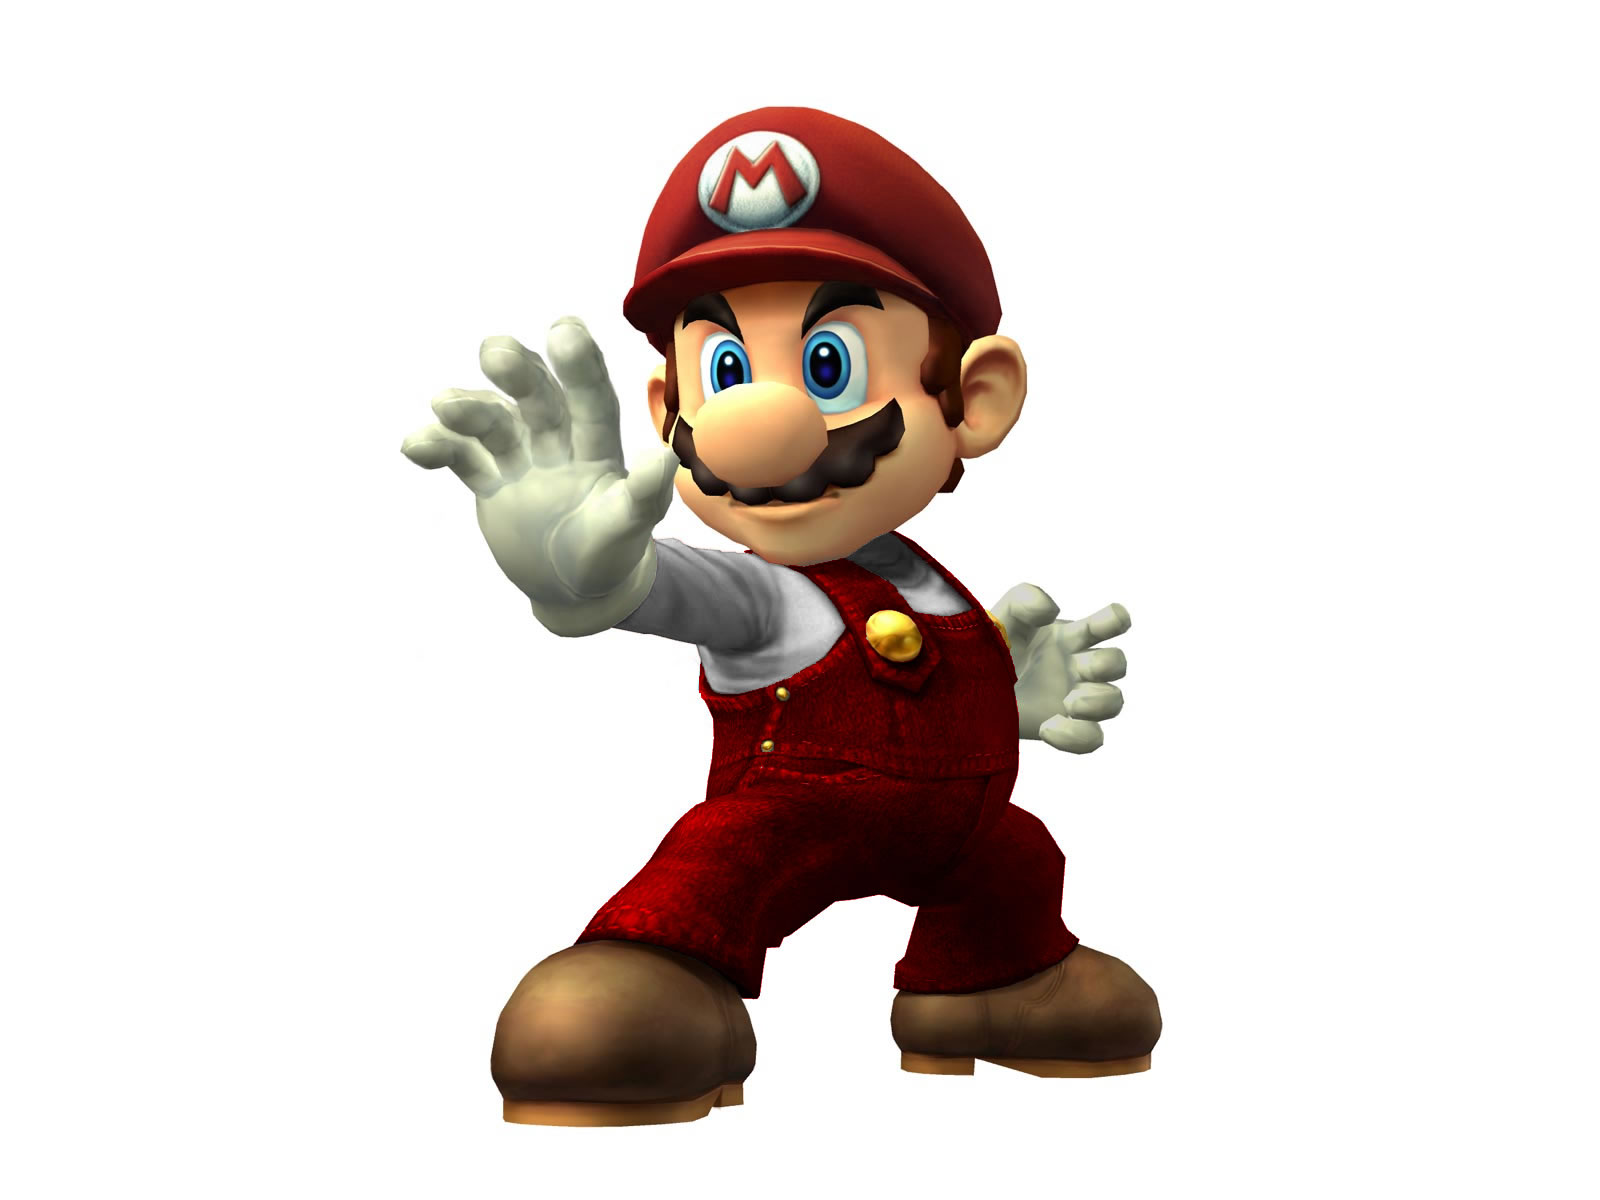 Mario, the iconic video game character, in a vibrant high-definition desktop wallpaper.